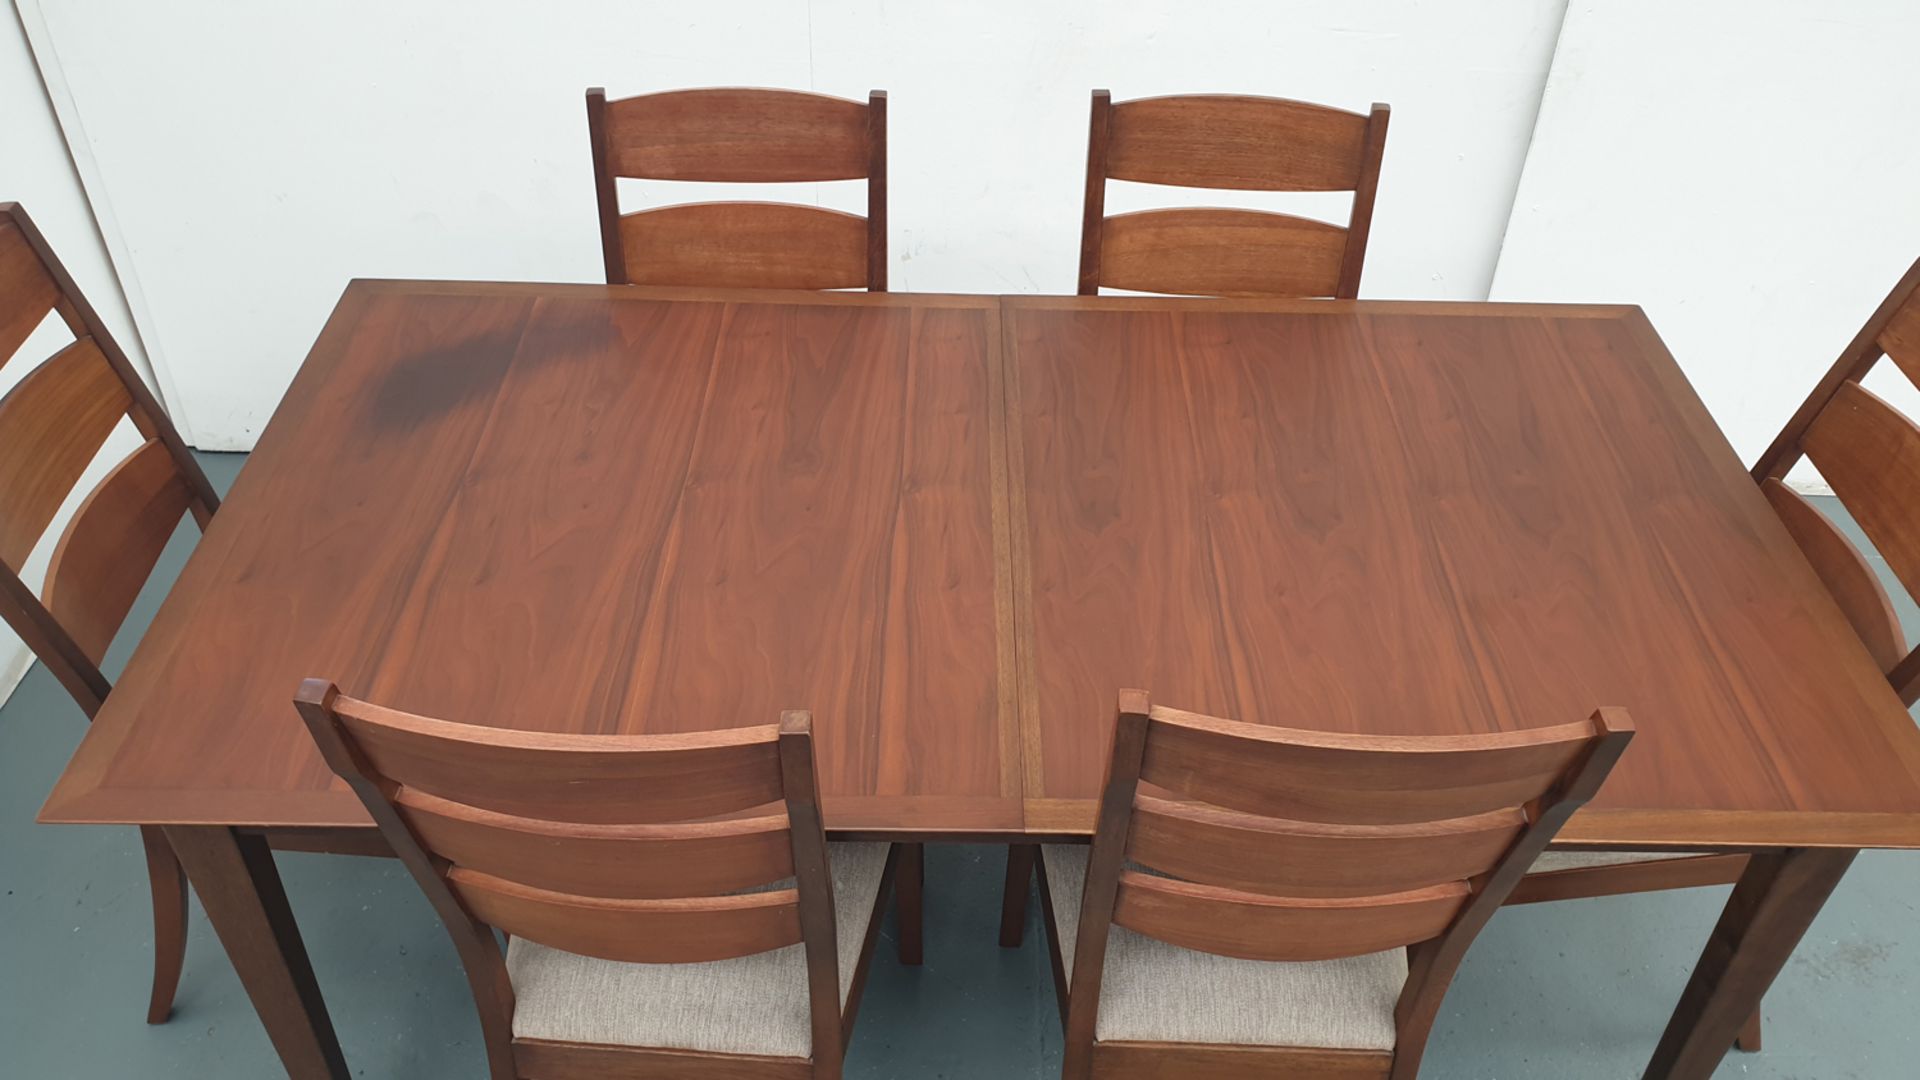 Solid Wood Dining Table & Chairs. Approx Dimensions 1700mm x 900mm x 780mm High. - Image 4 of 11